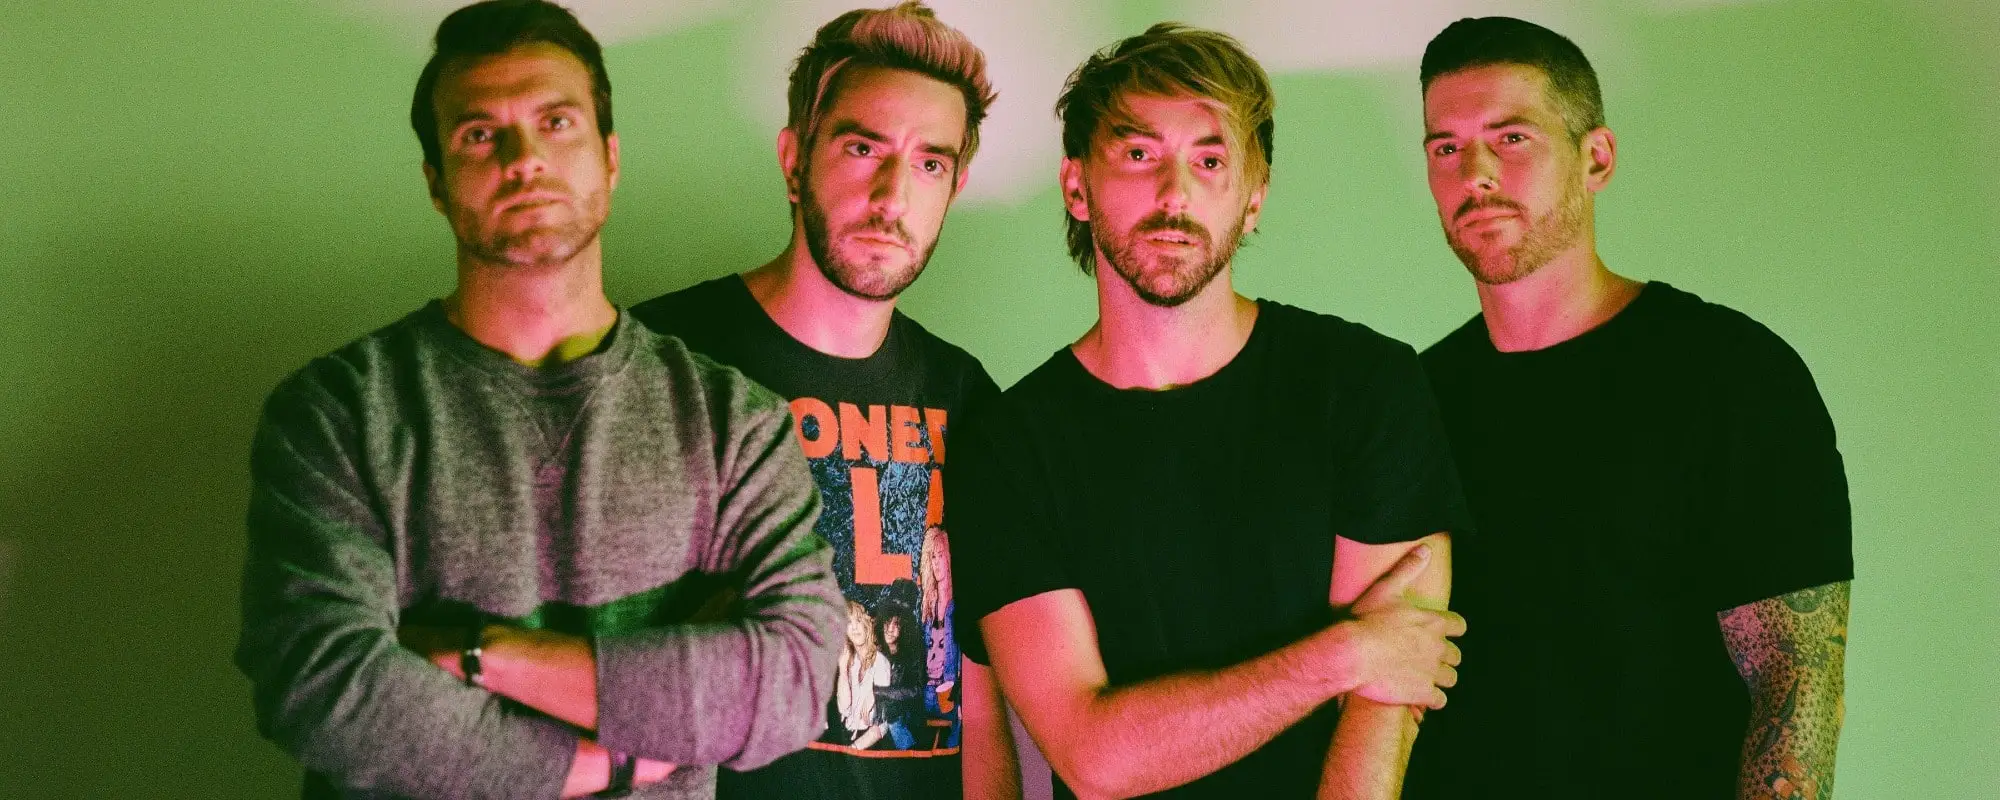 All Time Low Process Loss With “Once In A Lifetime” Video